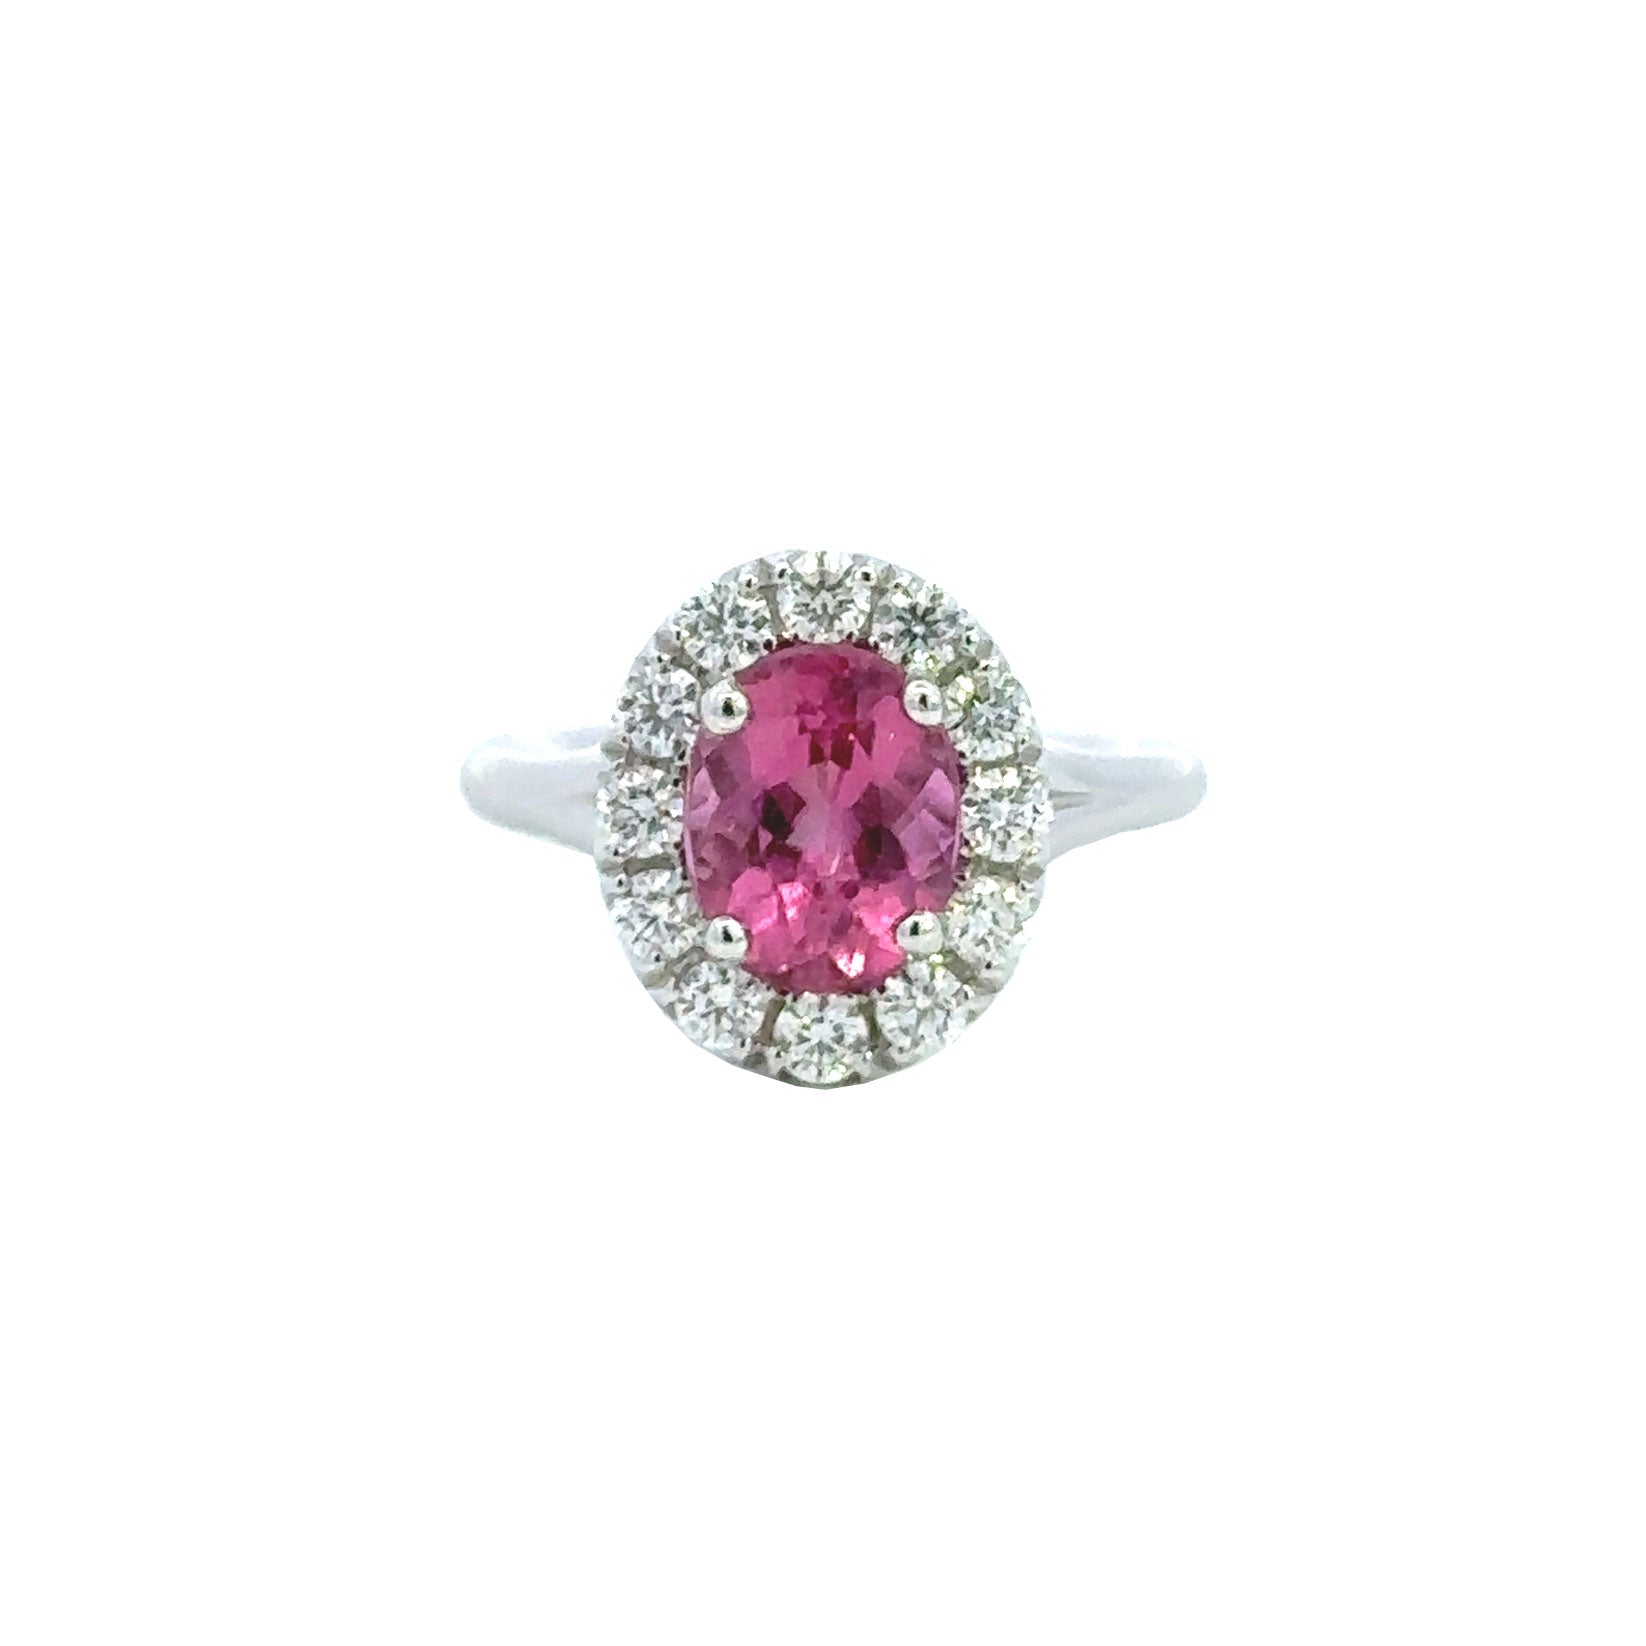 XO Exceptional White Gold Pink Tourmaline and Diamond Ring - Be On Park